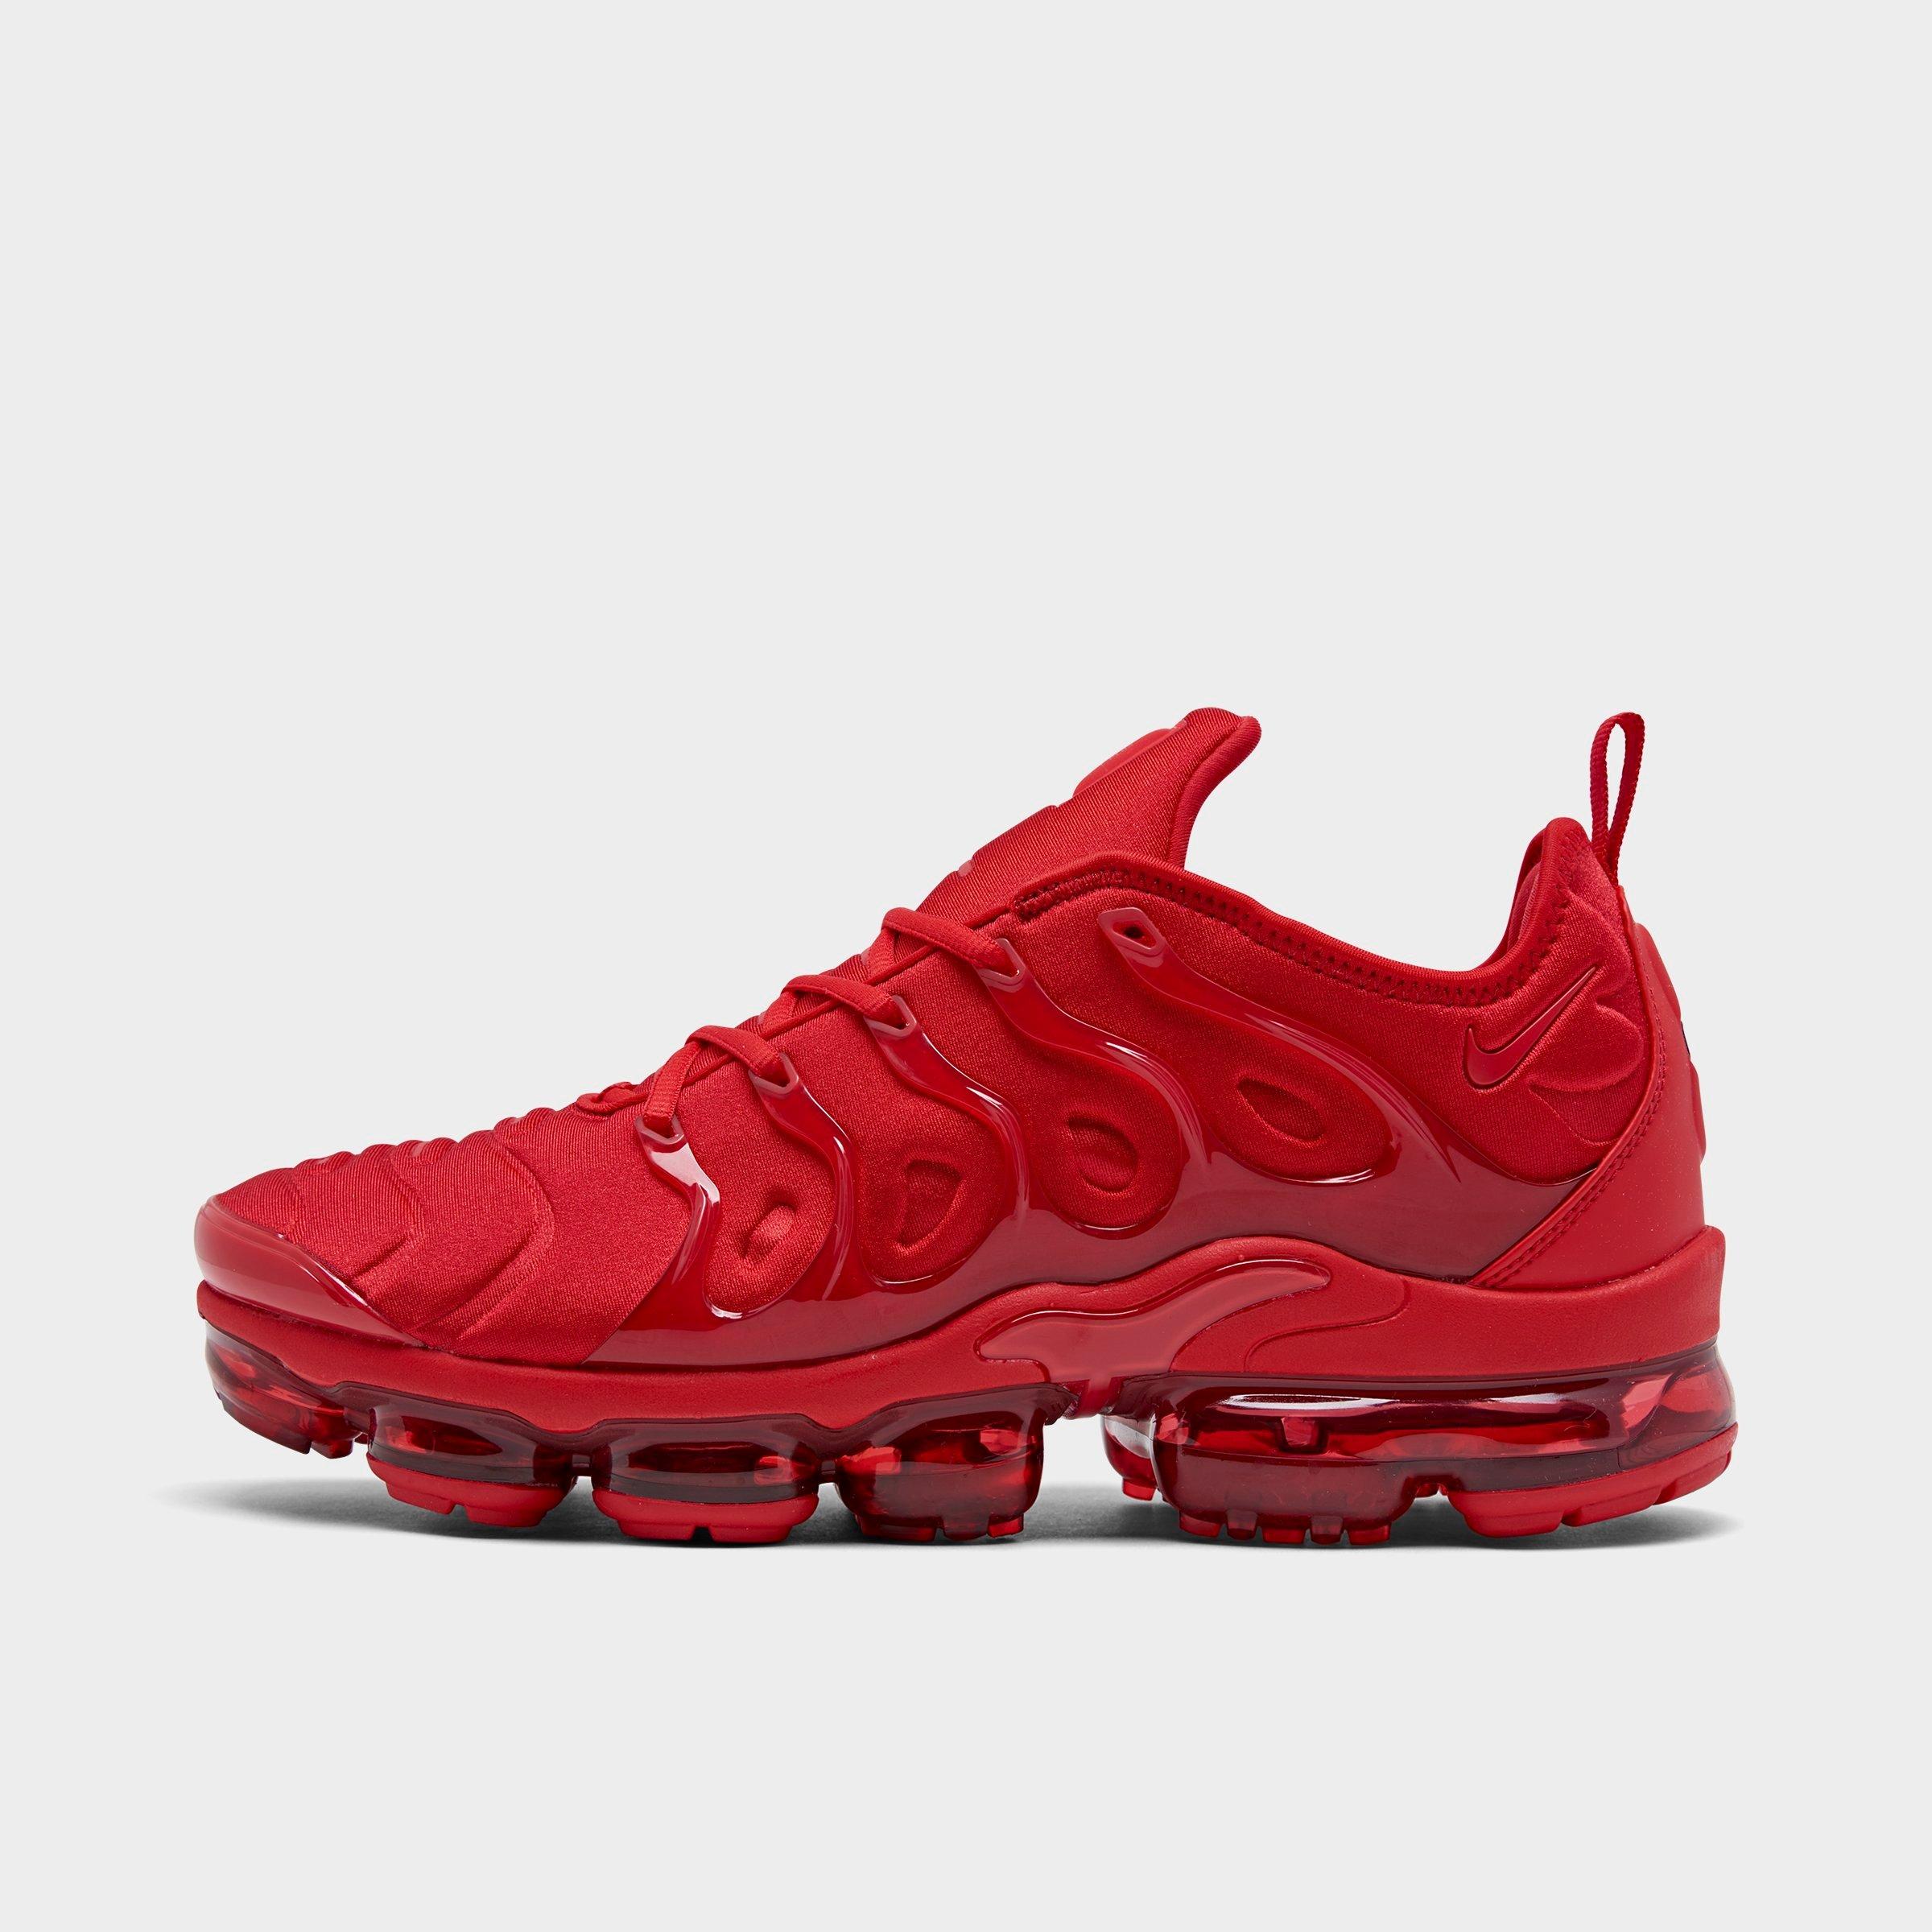 vapor air max black and red